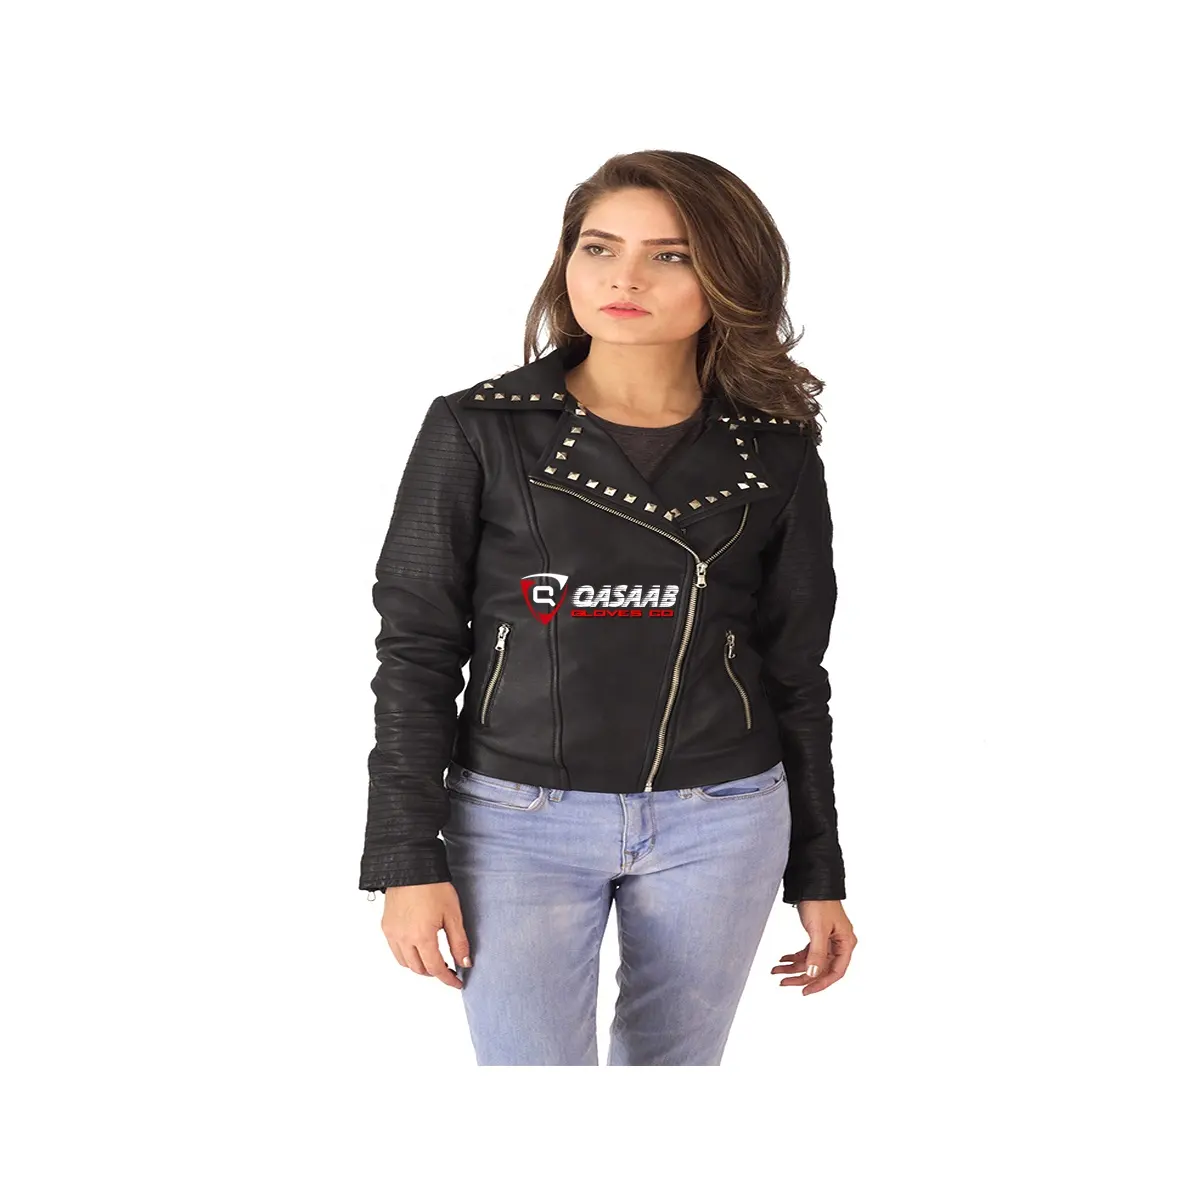 Women-Studded Breathable Outerwear-Slimmed-fit Custom-Color Longed-Zippers Black Fashion Leather Jacket With Custom-Color